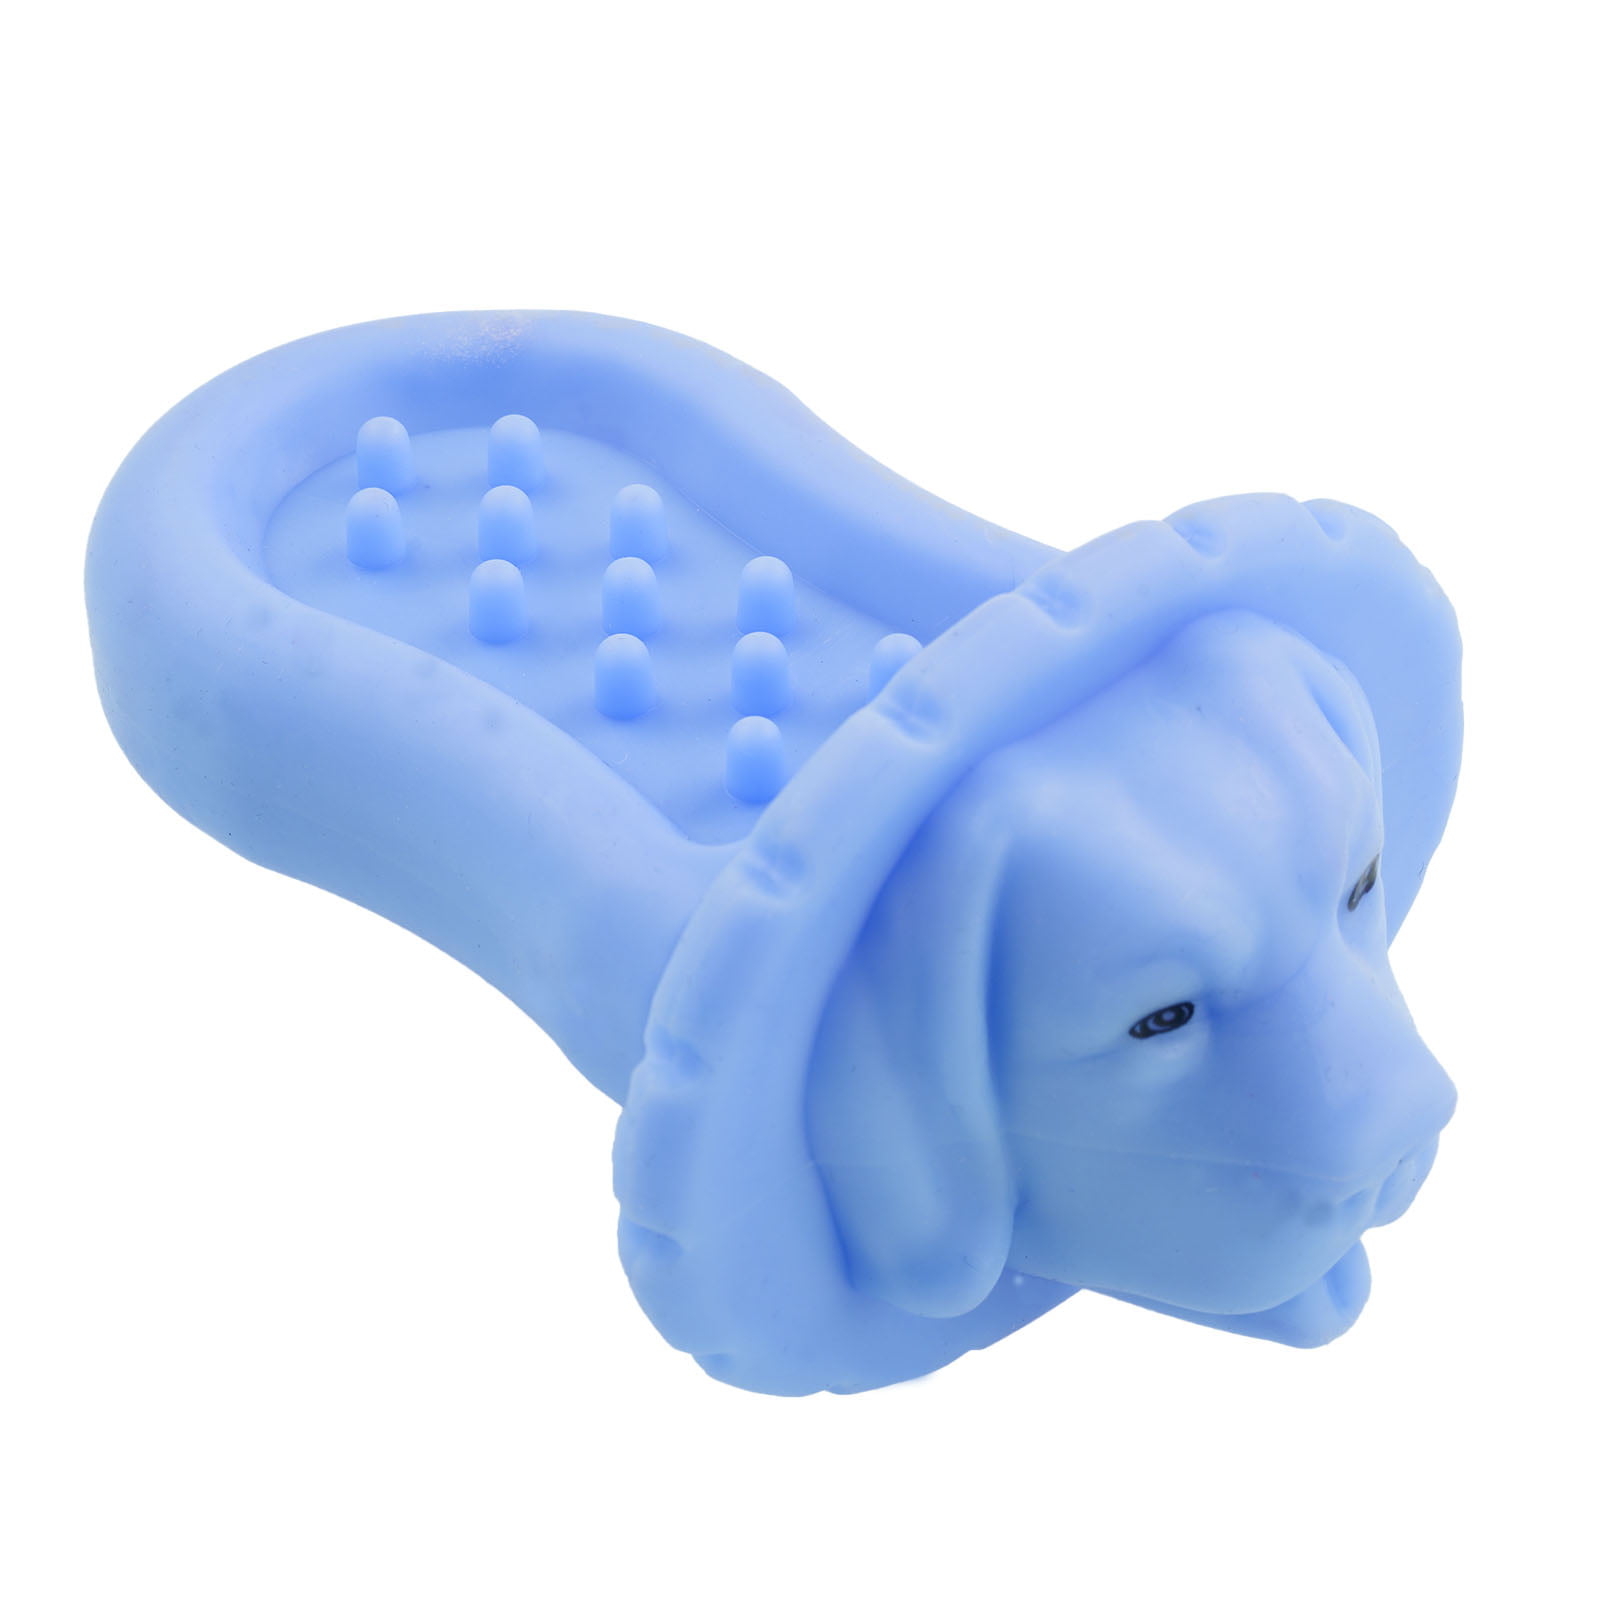 ChengFu Interactive Dog Toys, Crate Training Aids for Puppies, Dog Crate  Toys to Avoid Anxiety, Puppy Teething Toys for Boredom Reduce Stress  Anxiety